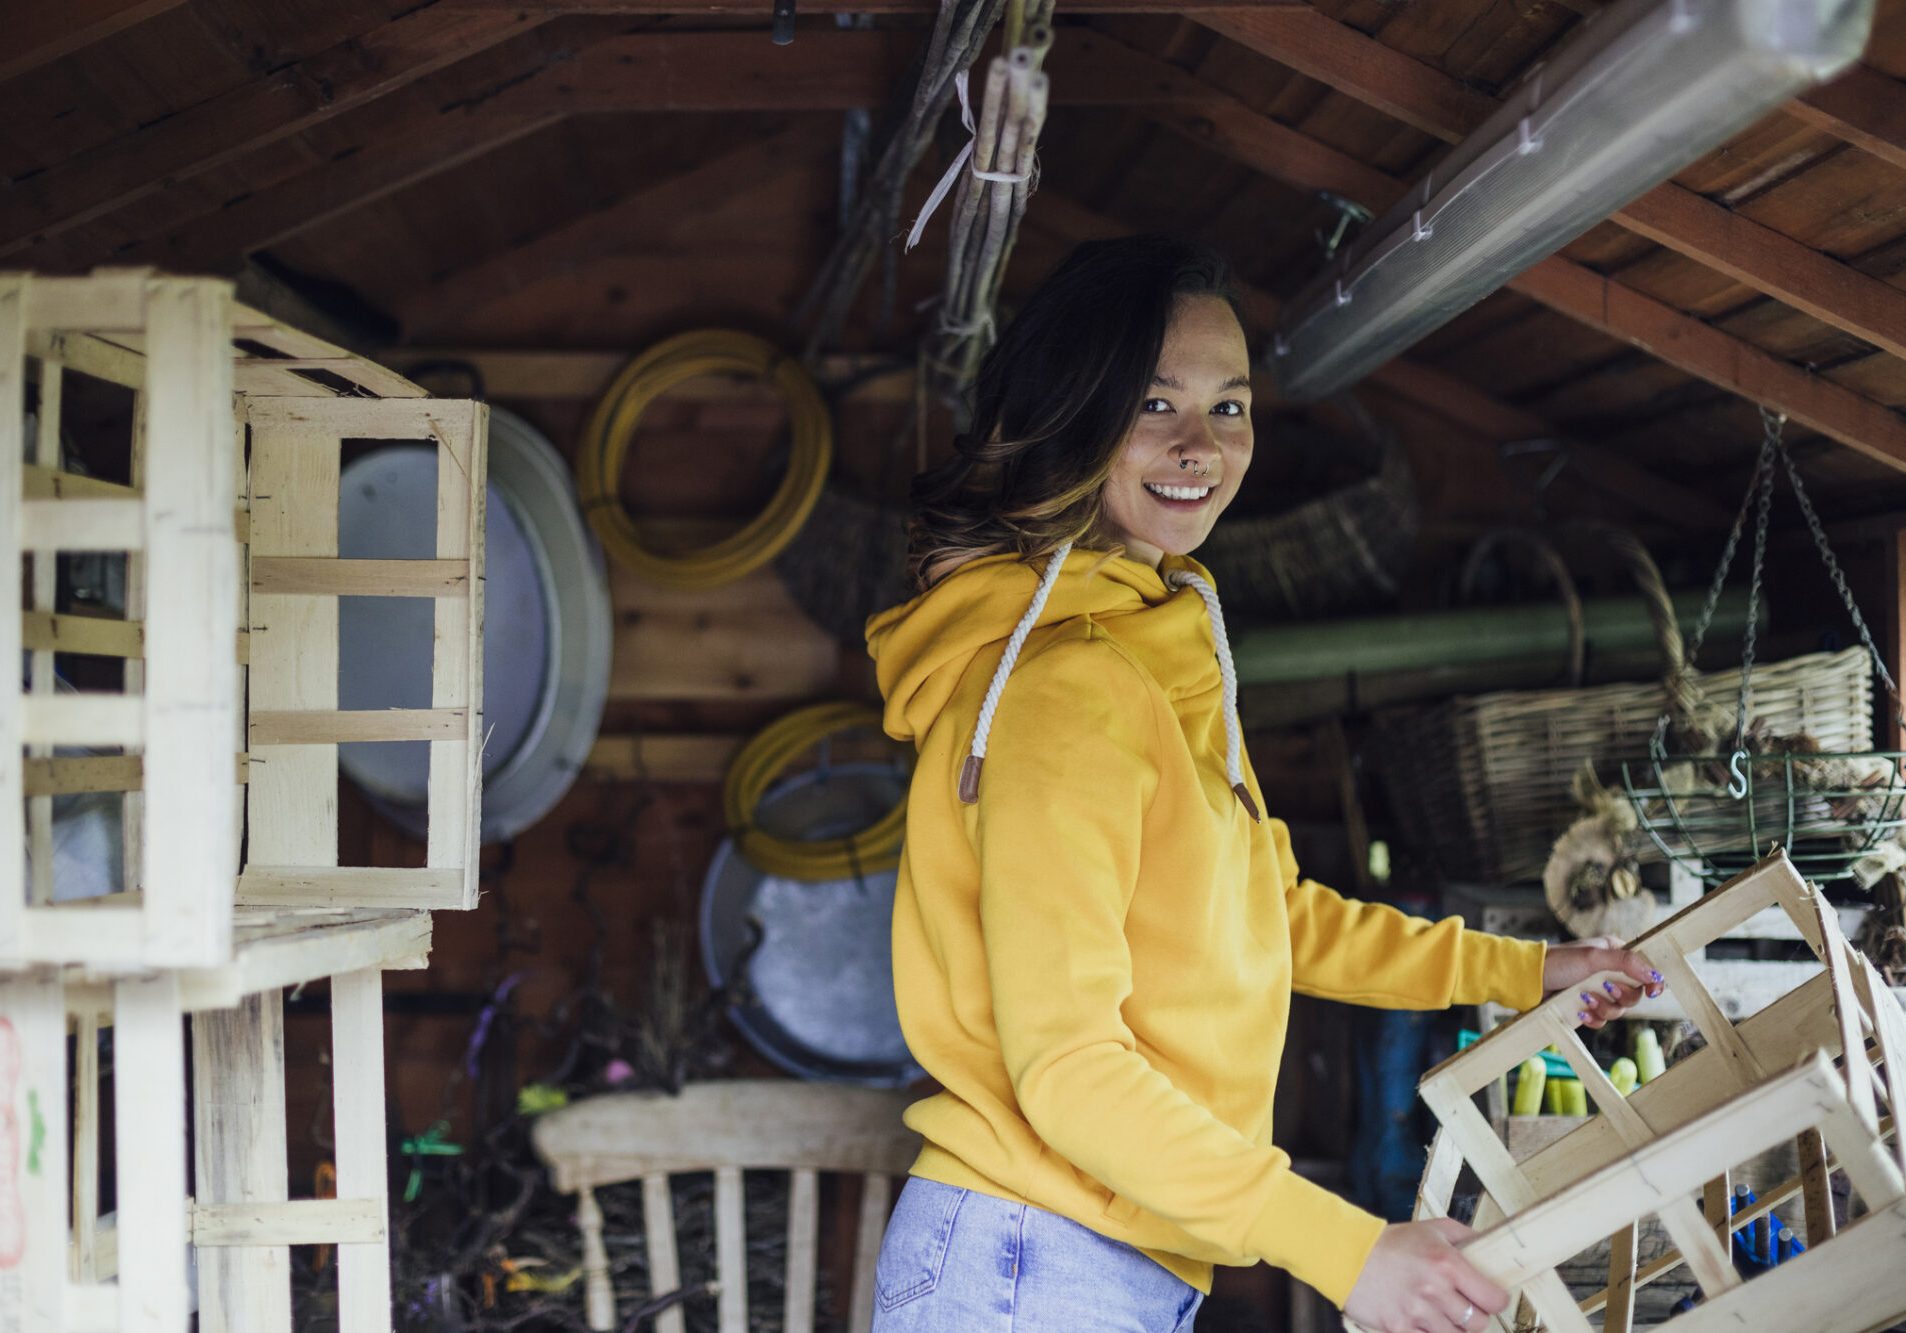 A young woman standing in a shed looking at the camera and holding a wooden crate. She is organising the shed.